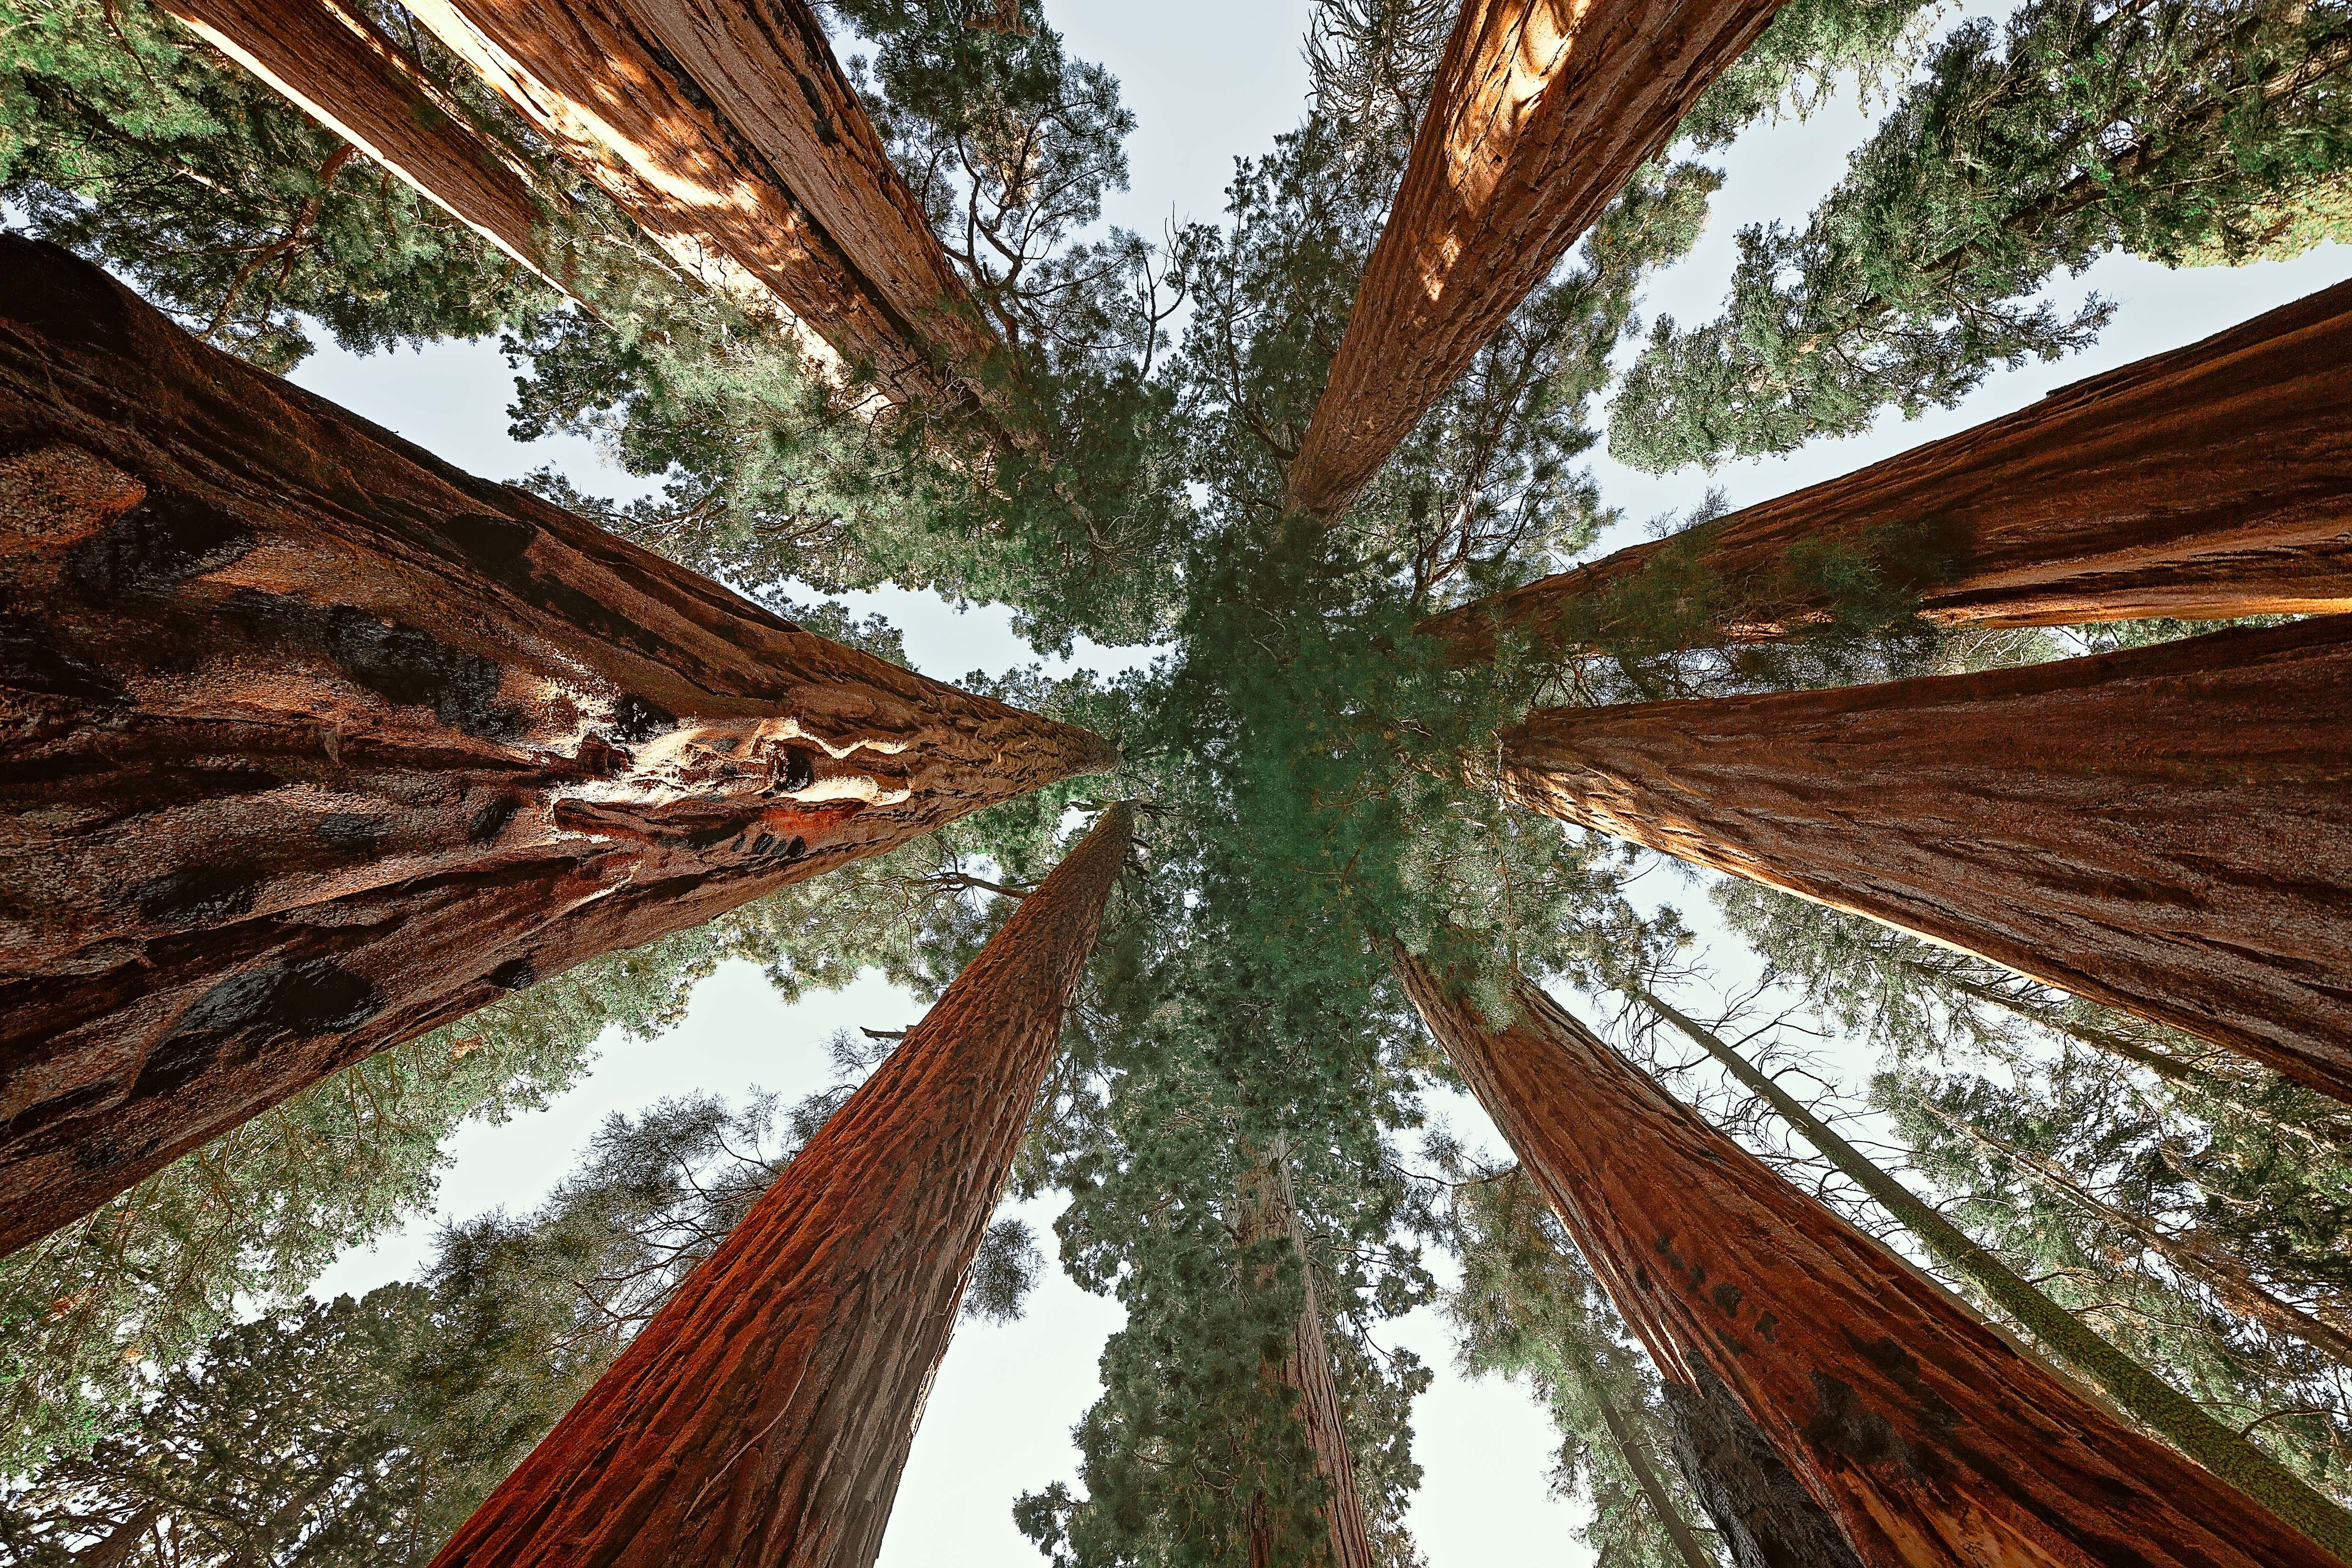 On this day in history, September 25, 1890, Congress establishes Sequoia National Park in California